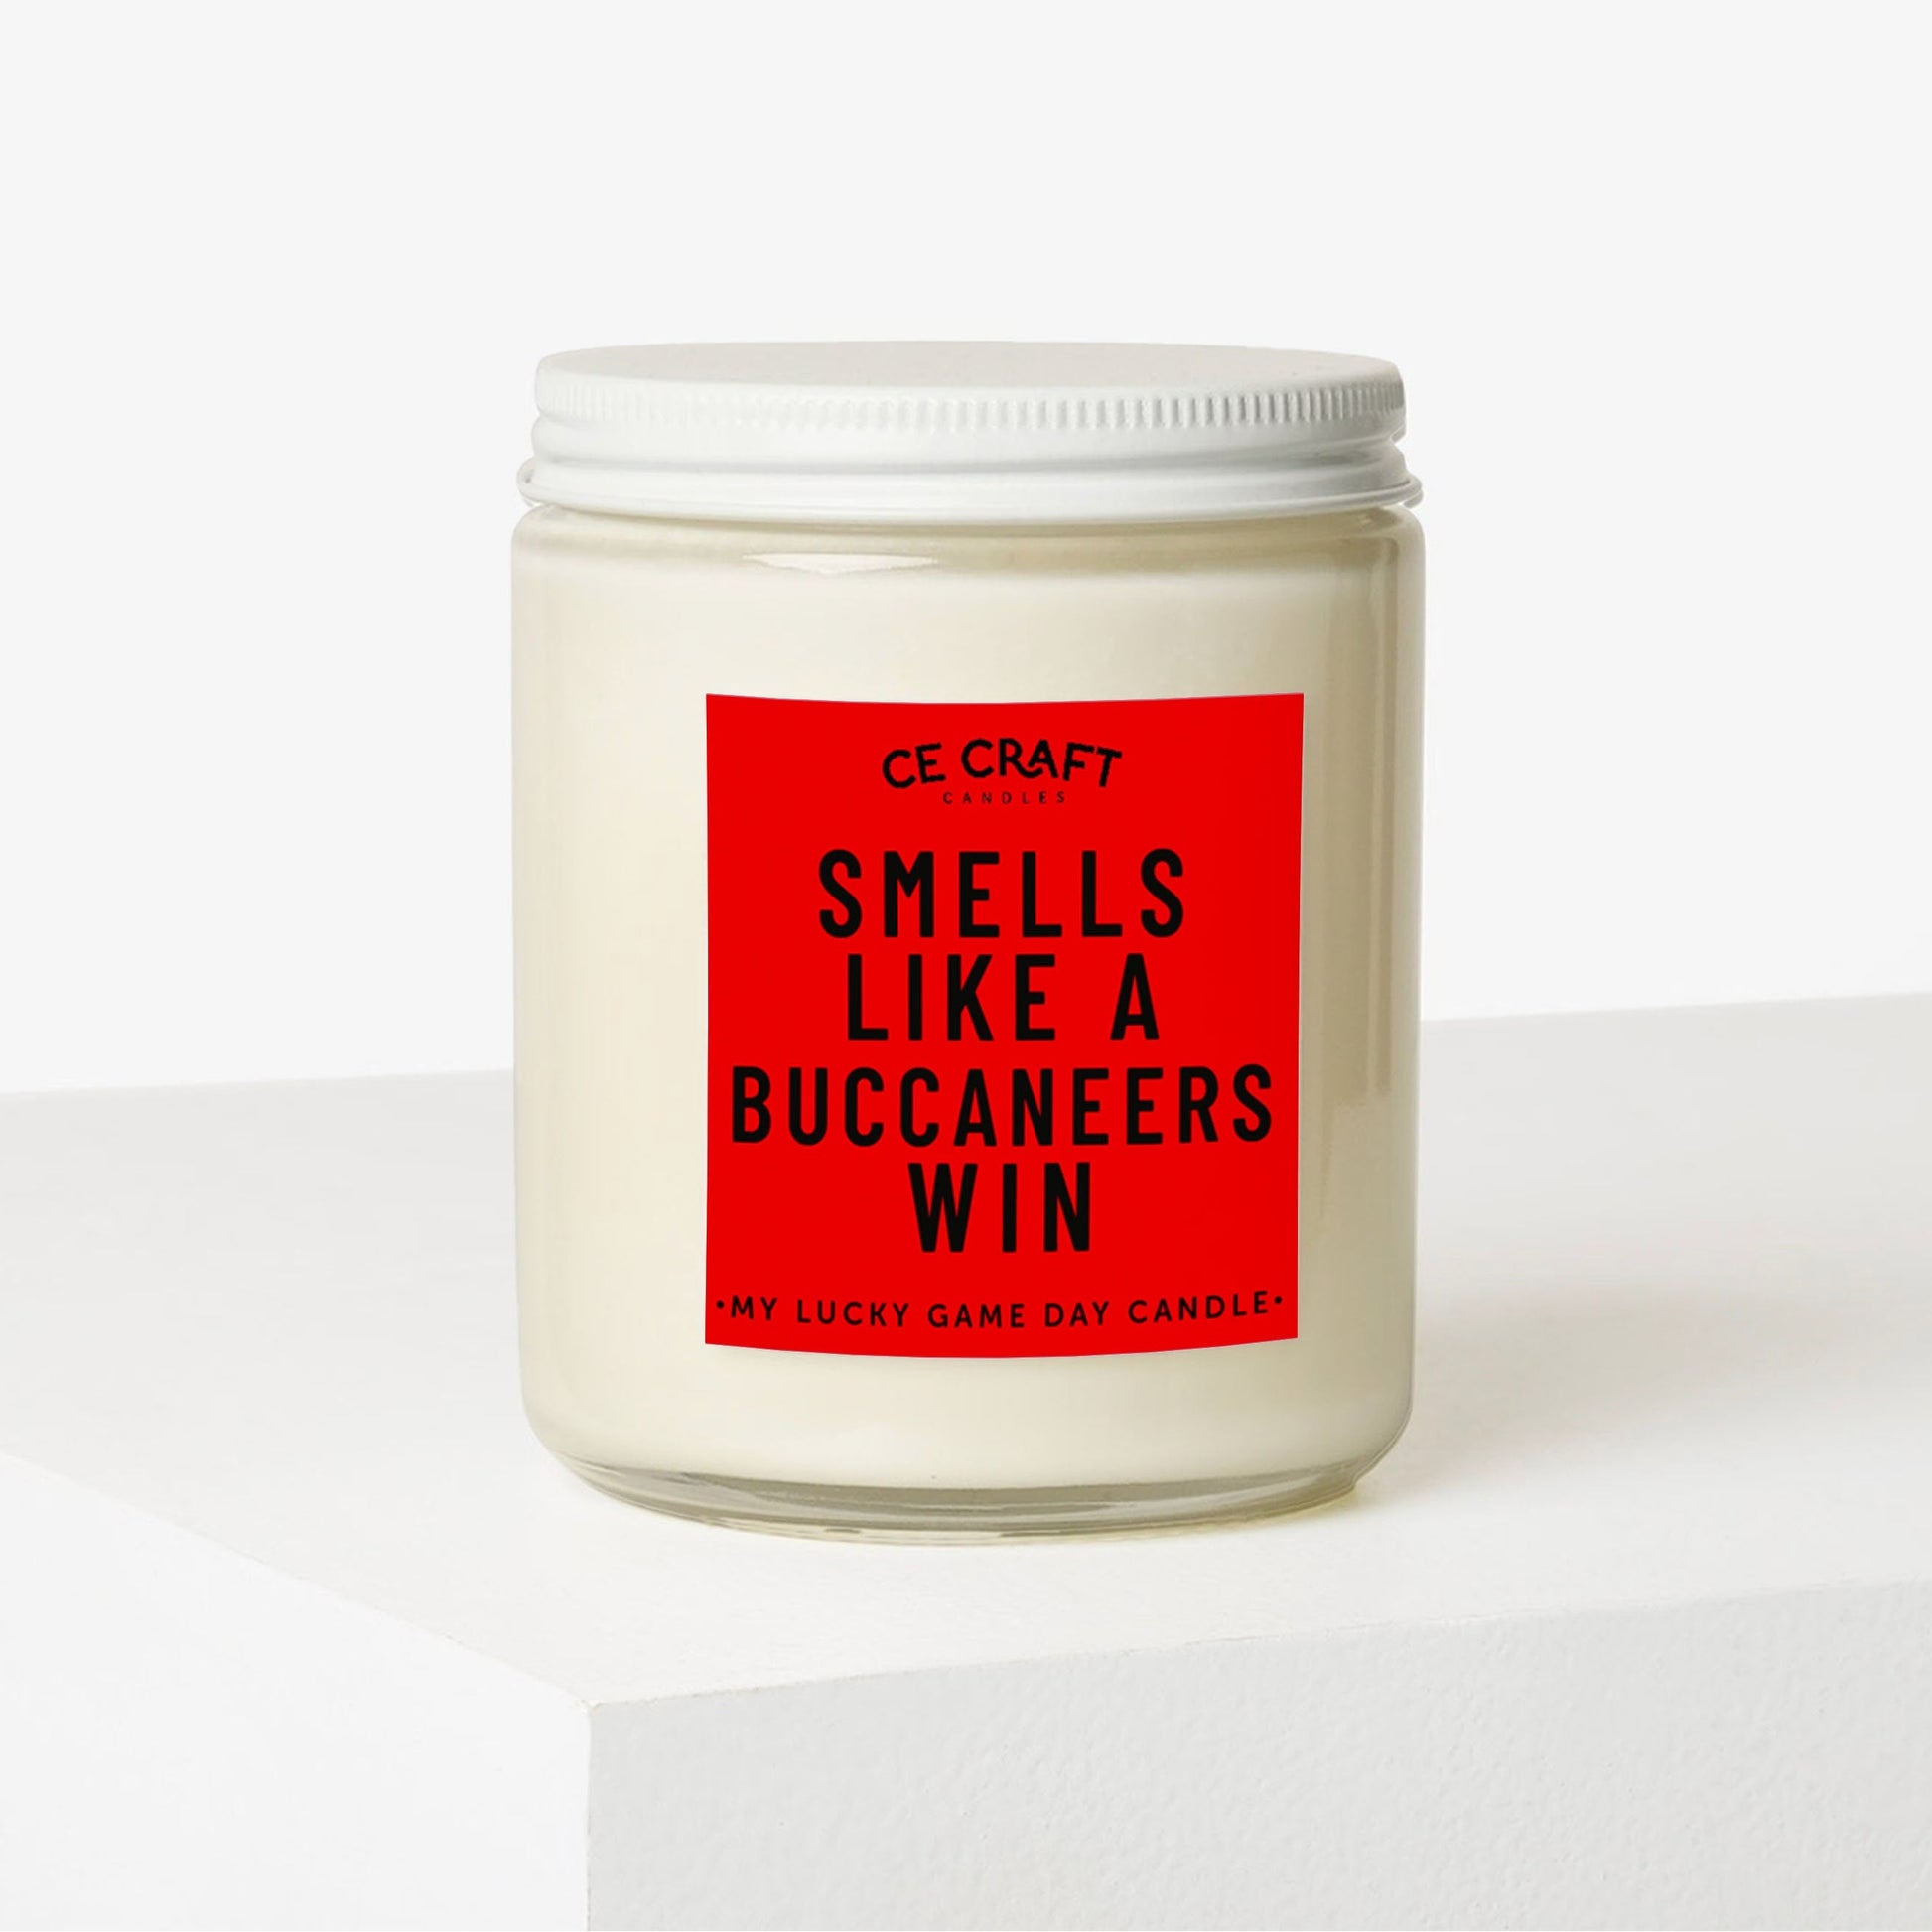 Smells Like a Buccaneers Win Scented Candle C & E Craft Co 